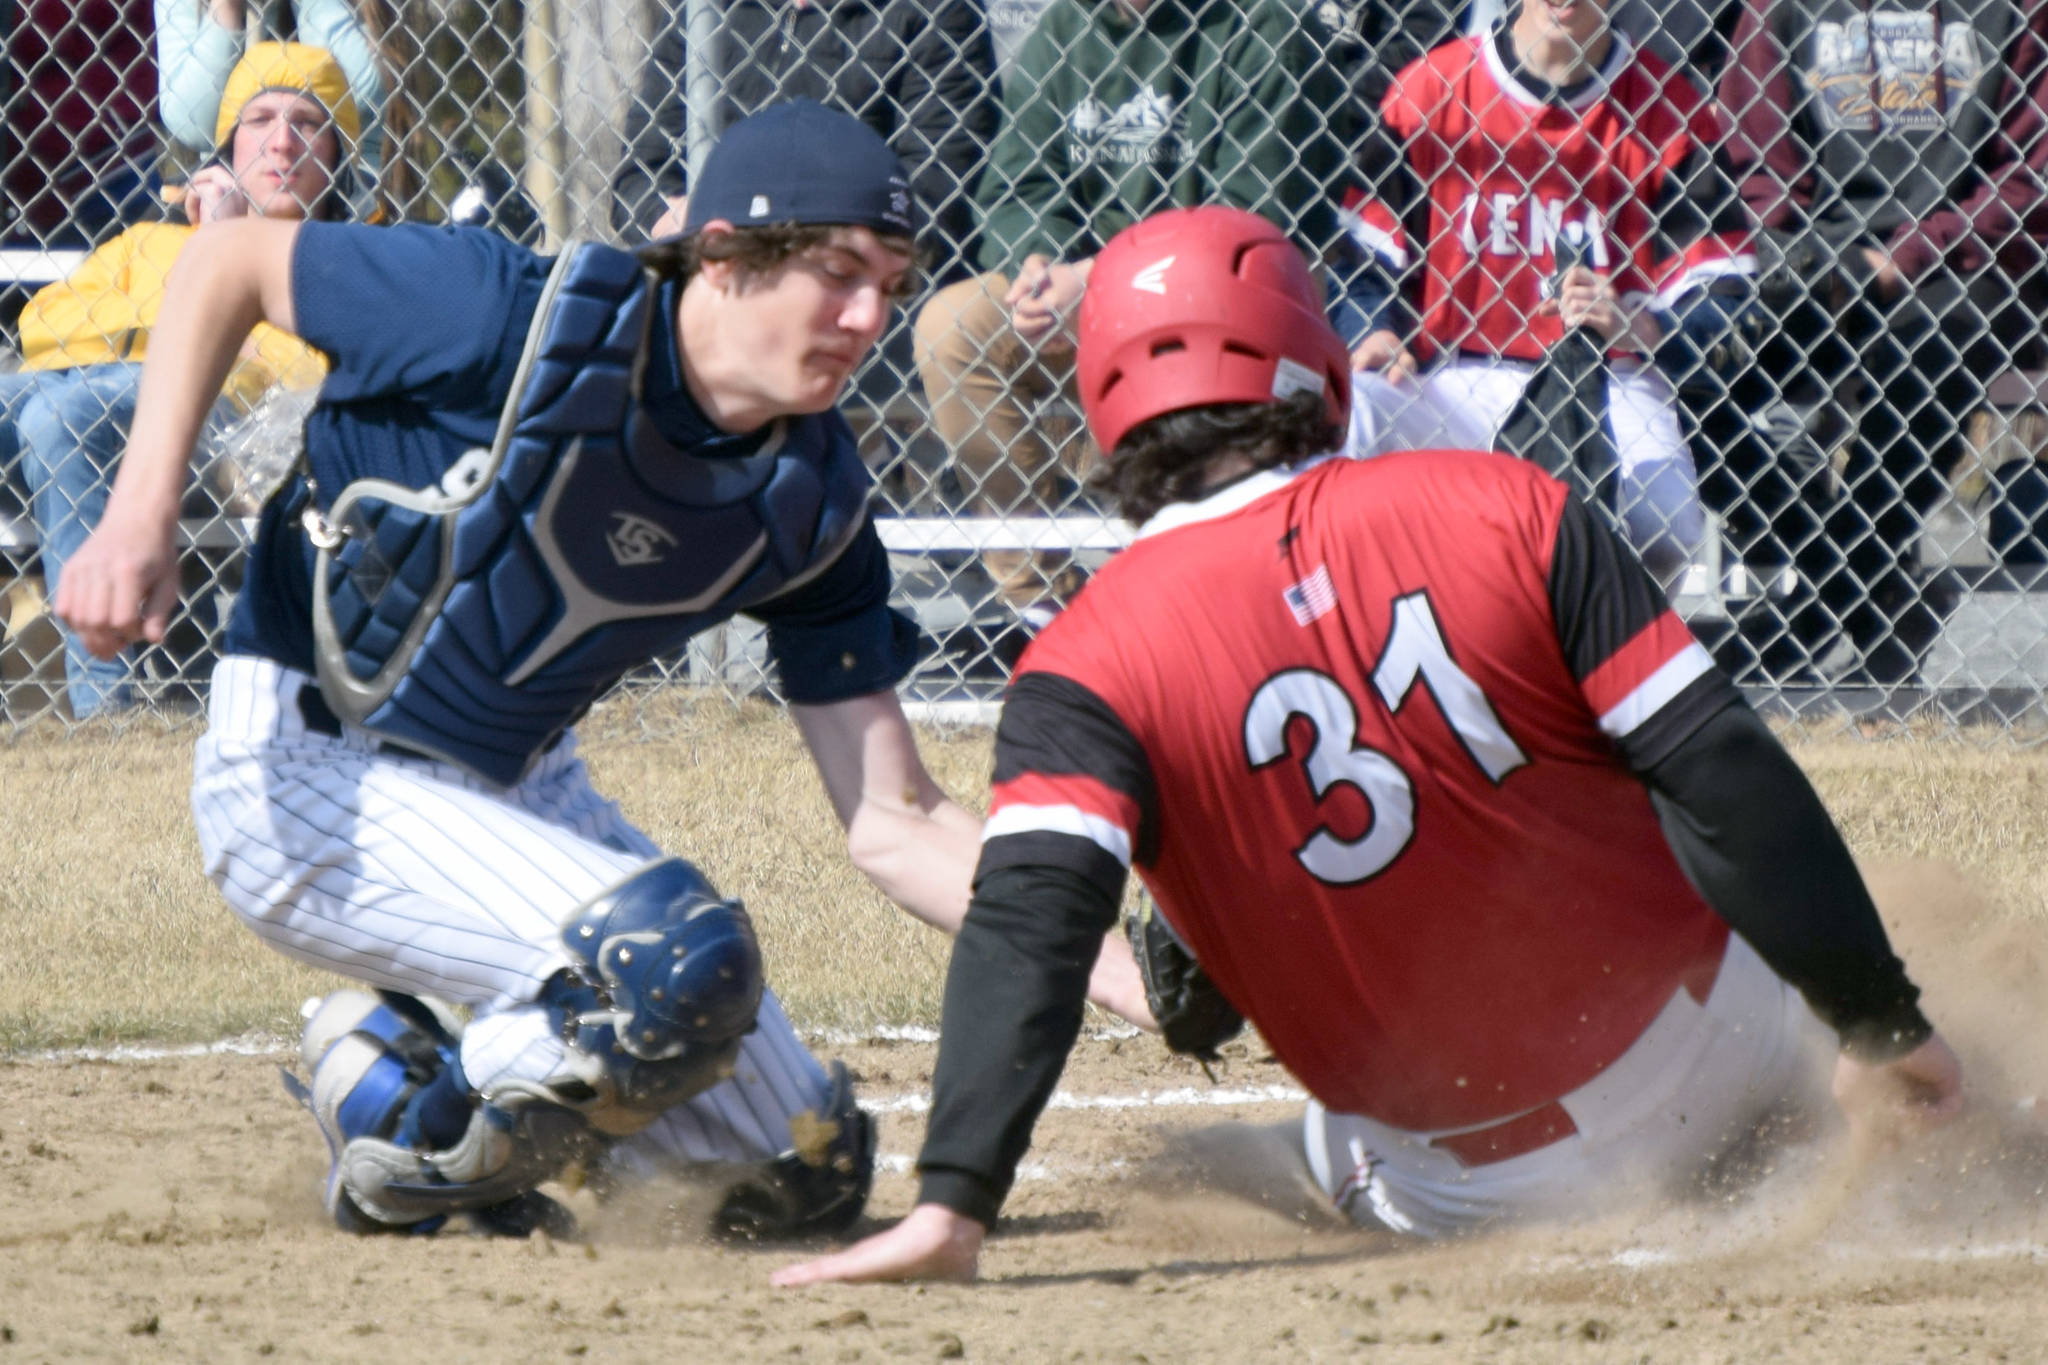 Kenai Central's Jackson DuPerron slides under the tag of Soldotna catcher Jacob Belger on Tuesday, May 4, 2021, at the Soldotna Little League fields in Soldotna, Alaska. (Photo by Jeff Helminiak/Peninsula Clarion)